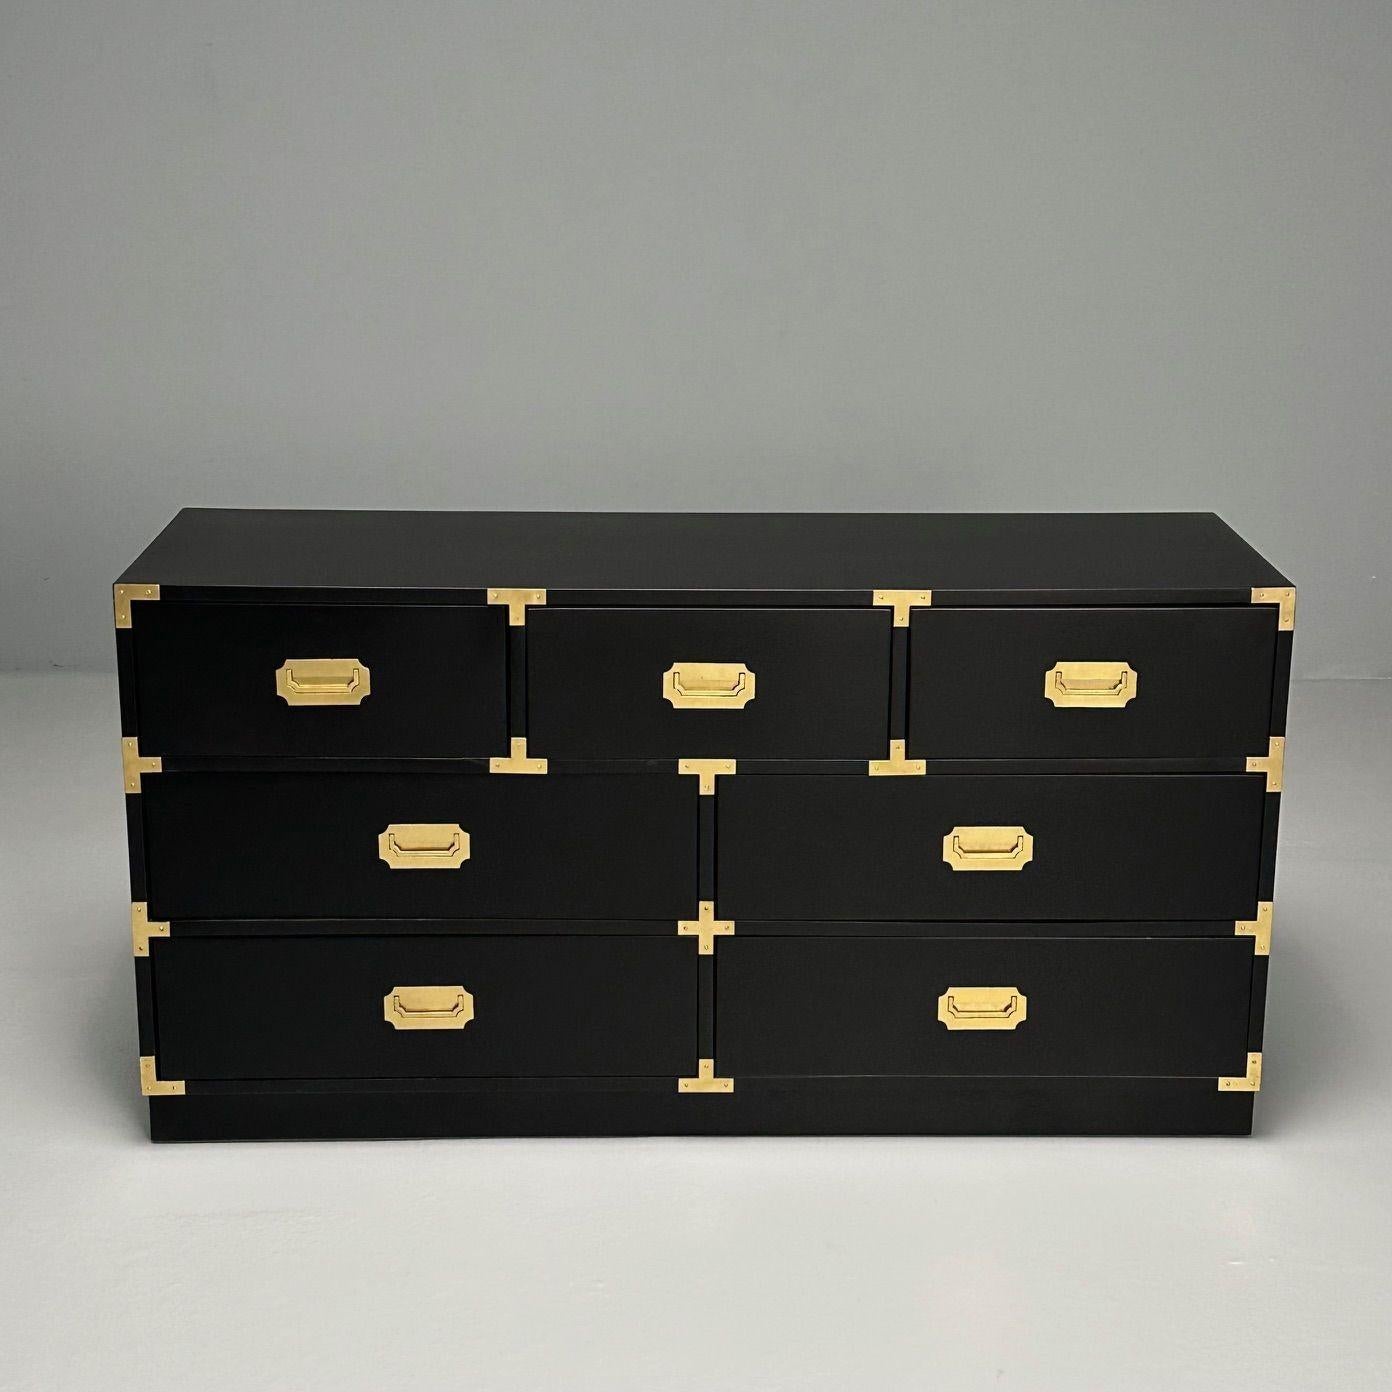 Hollywood Regency, Campaign Chest or Dresser, Black Paint, Brass, USA, 1970s

A single mid-century modern campaign dresser designed and produced in the United States, circa 1970s. This cabinet has been newly refinished with a black satin finish. The